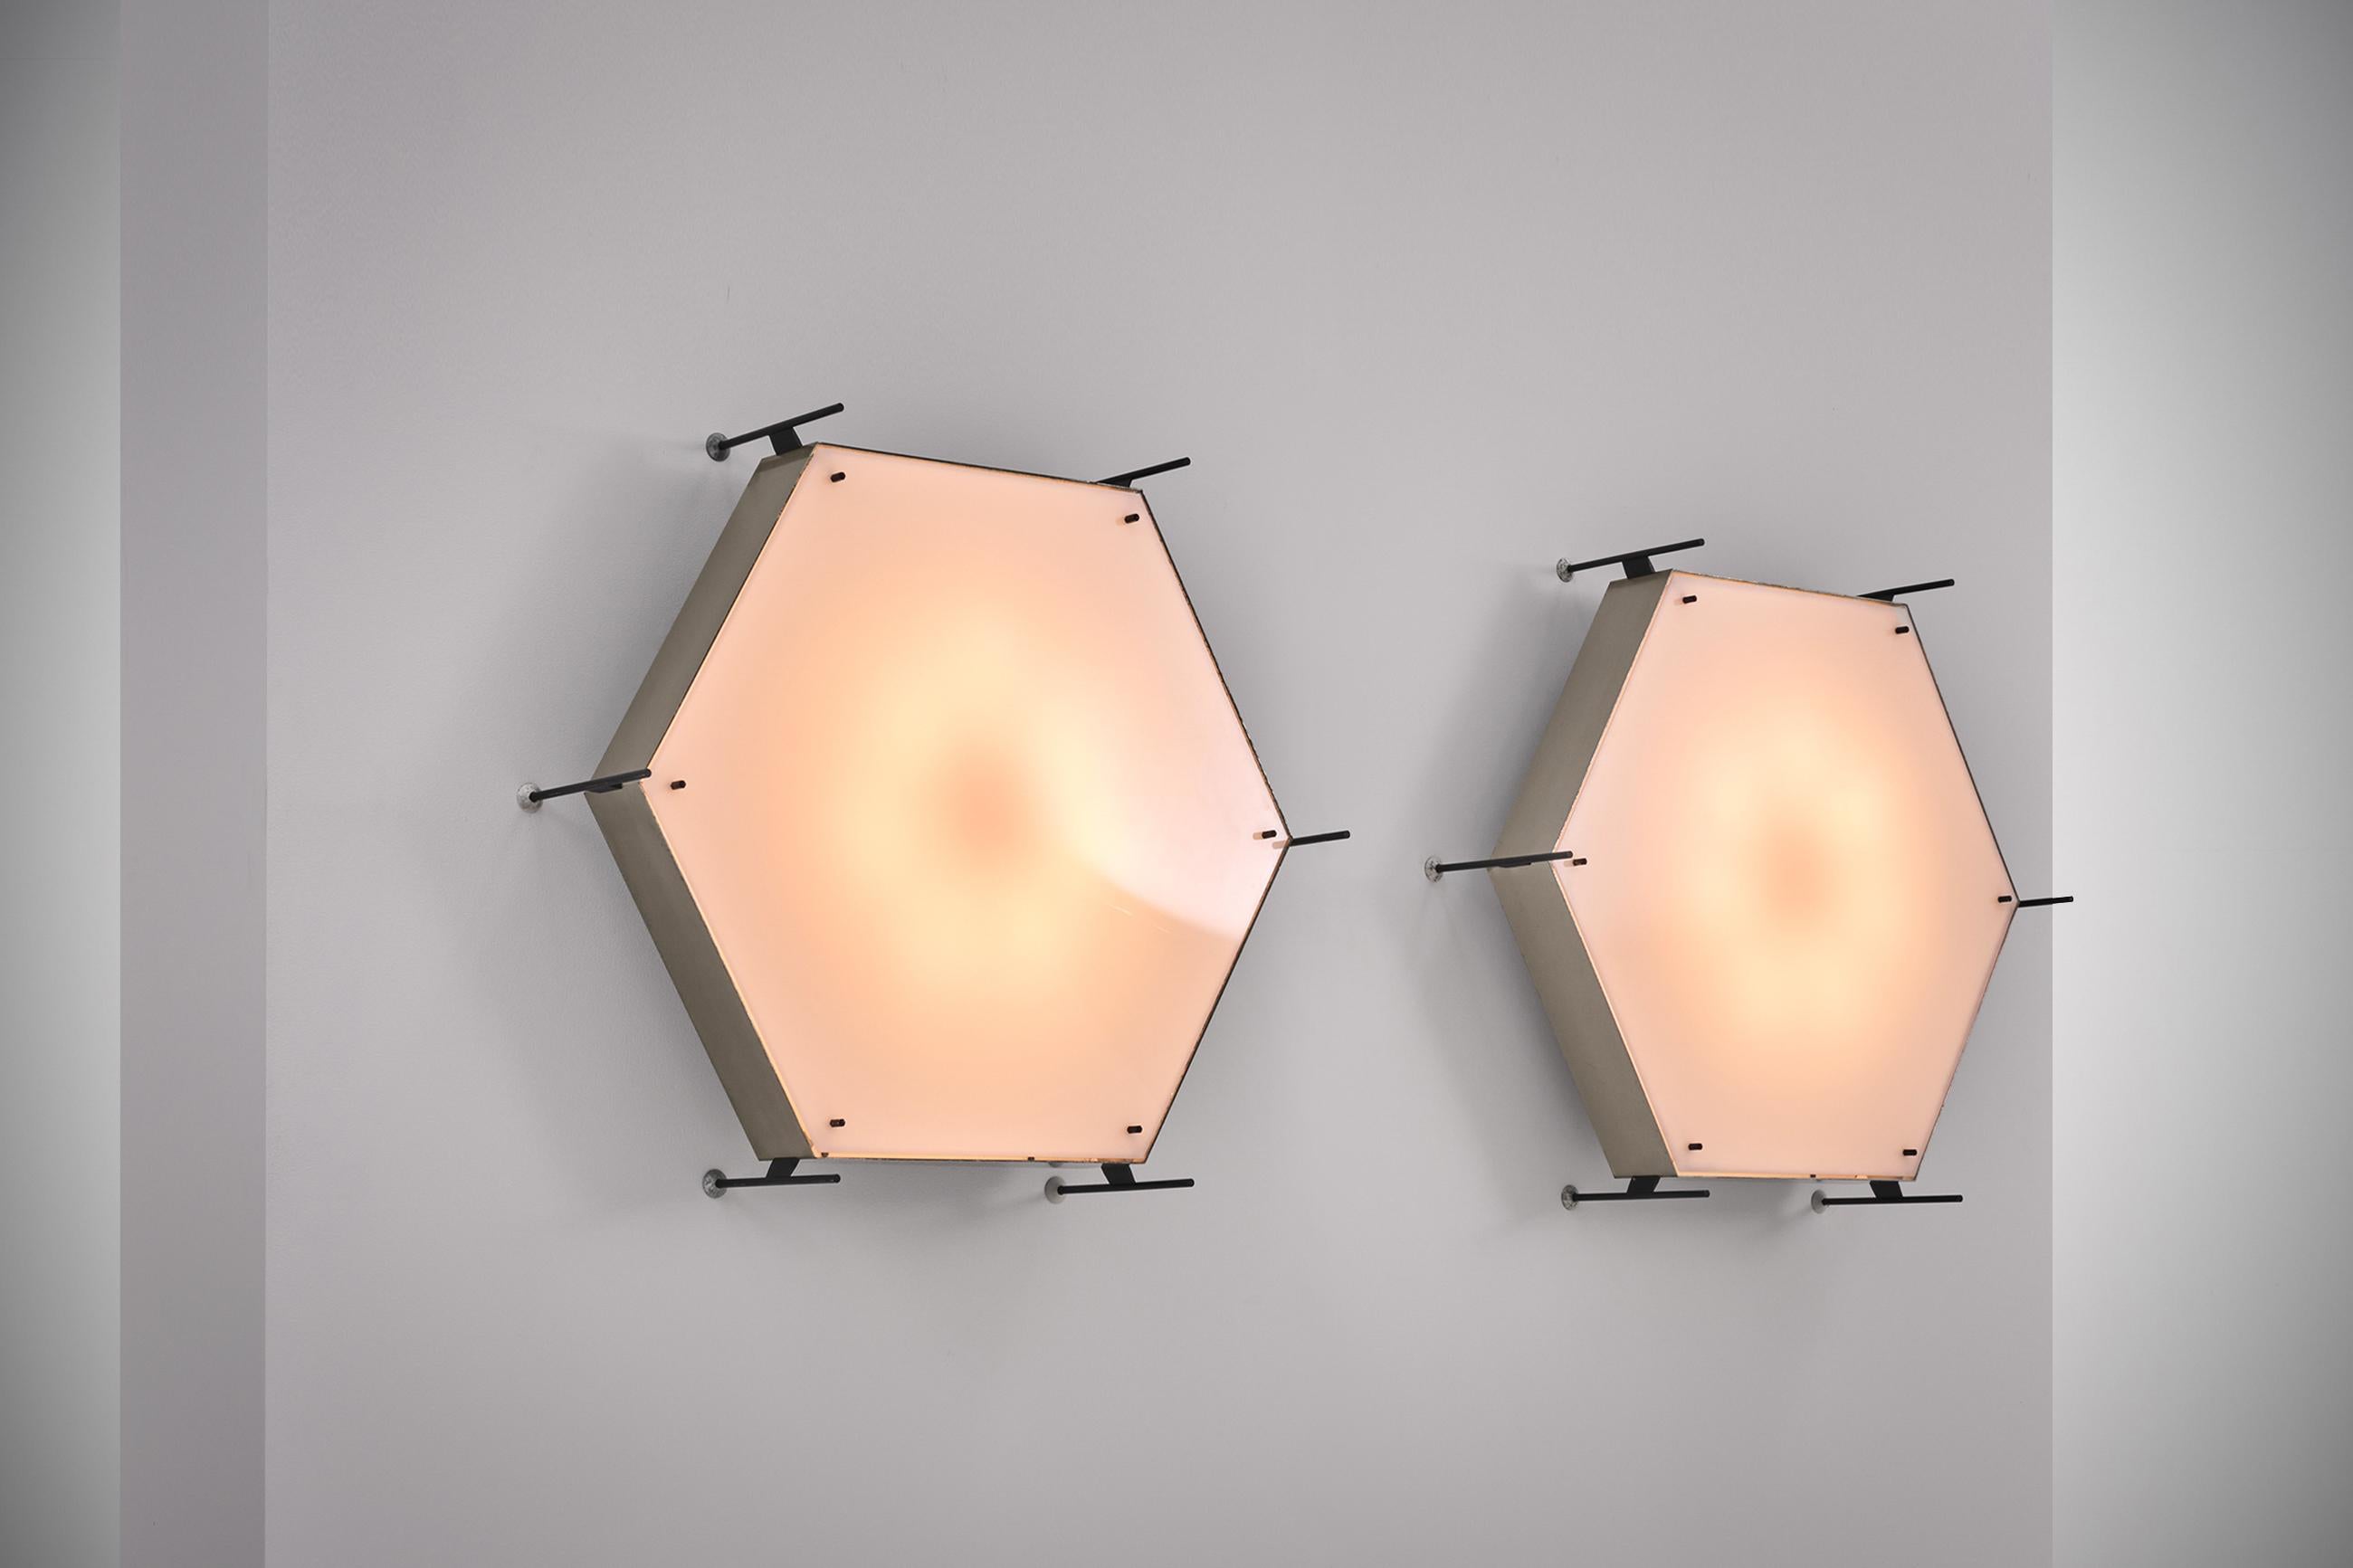 Rare and impressive pair of model no. 12712 lamps by Angelo Lelli for Arredoluce, Italy circa 1958. Very well made lamps out nickel-plated brass, painted brass and an acrylic diffuser. The lamps make quite an impression due to it's size and radical